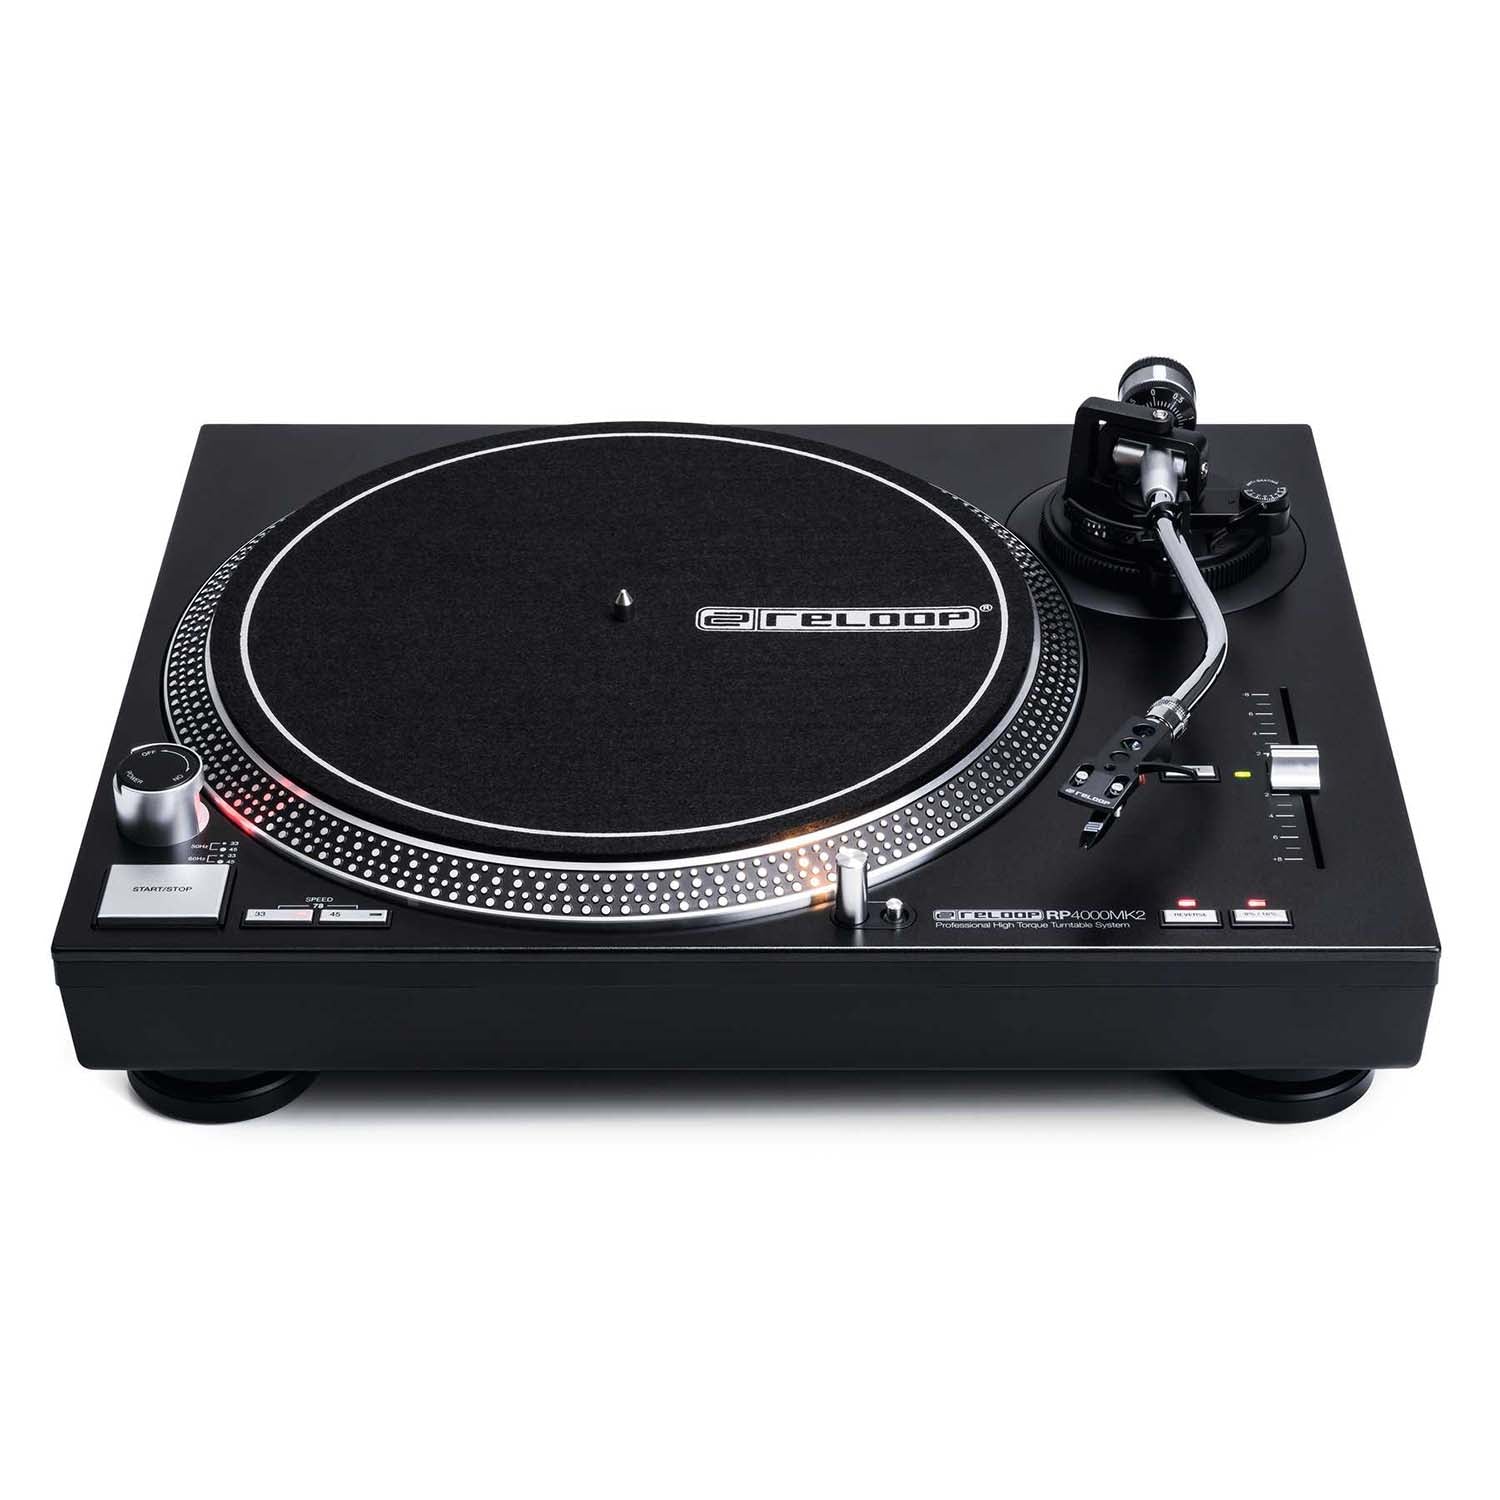 B-Stock: Reloop RP-4000-MK2, Professional High-Torque Turntable System - Hollywood DJ